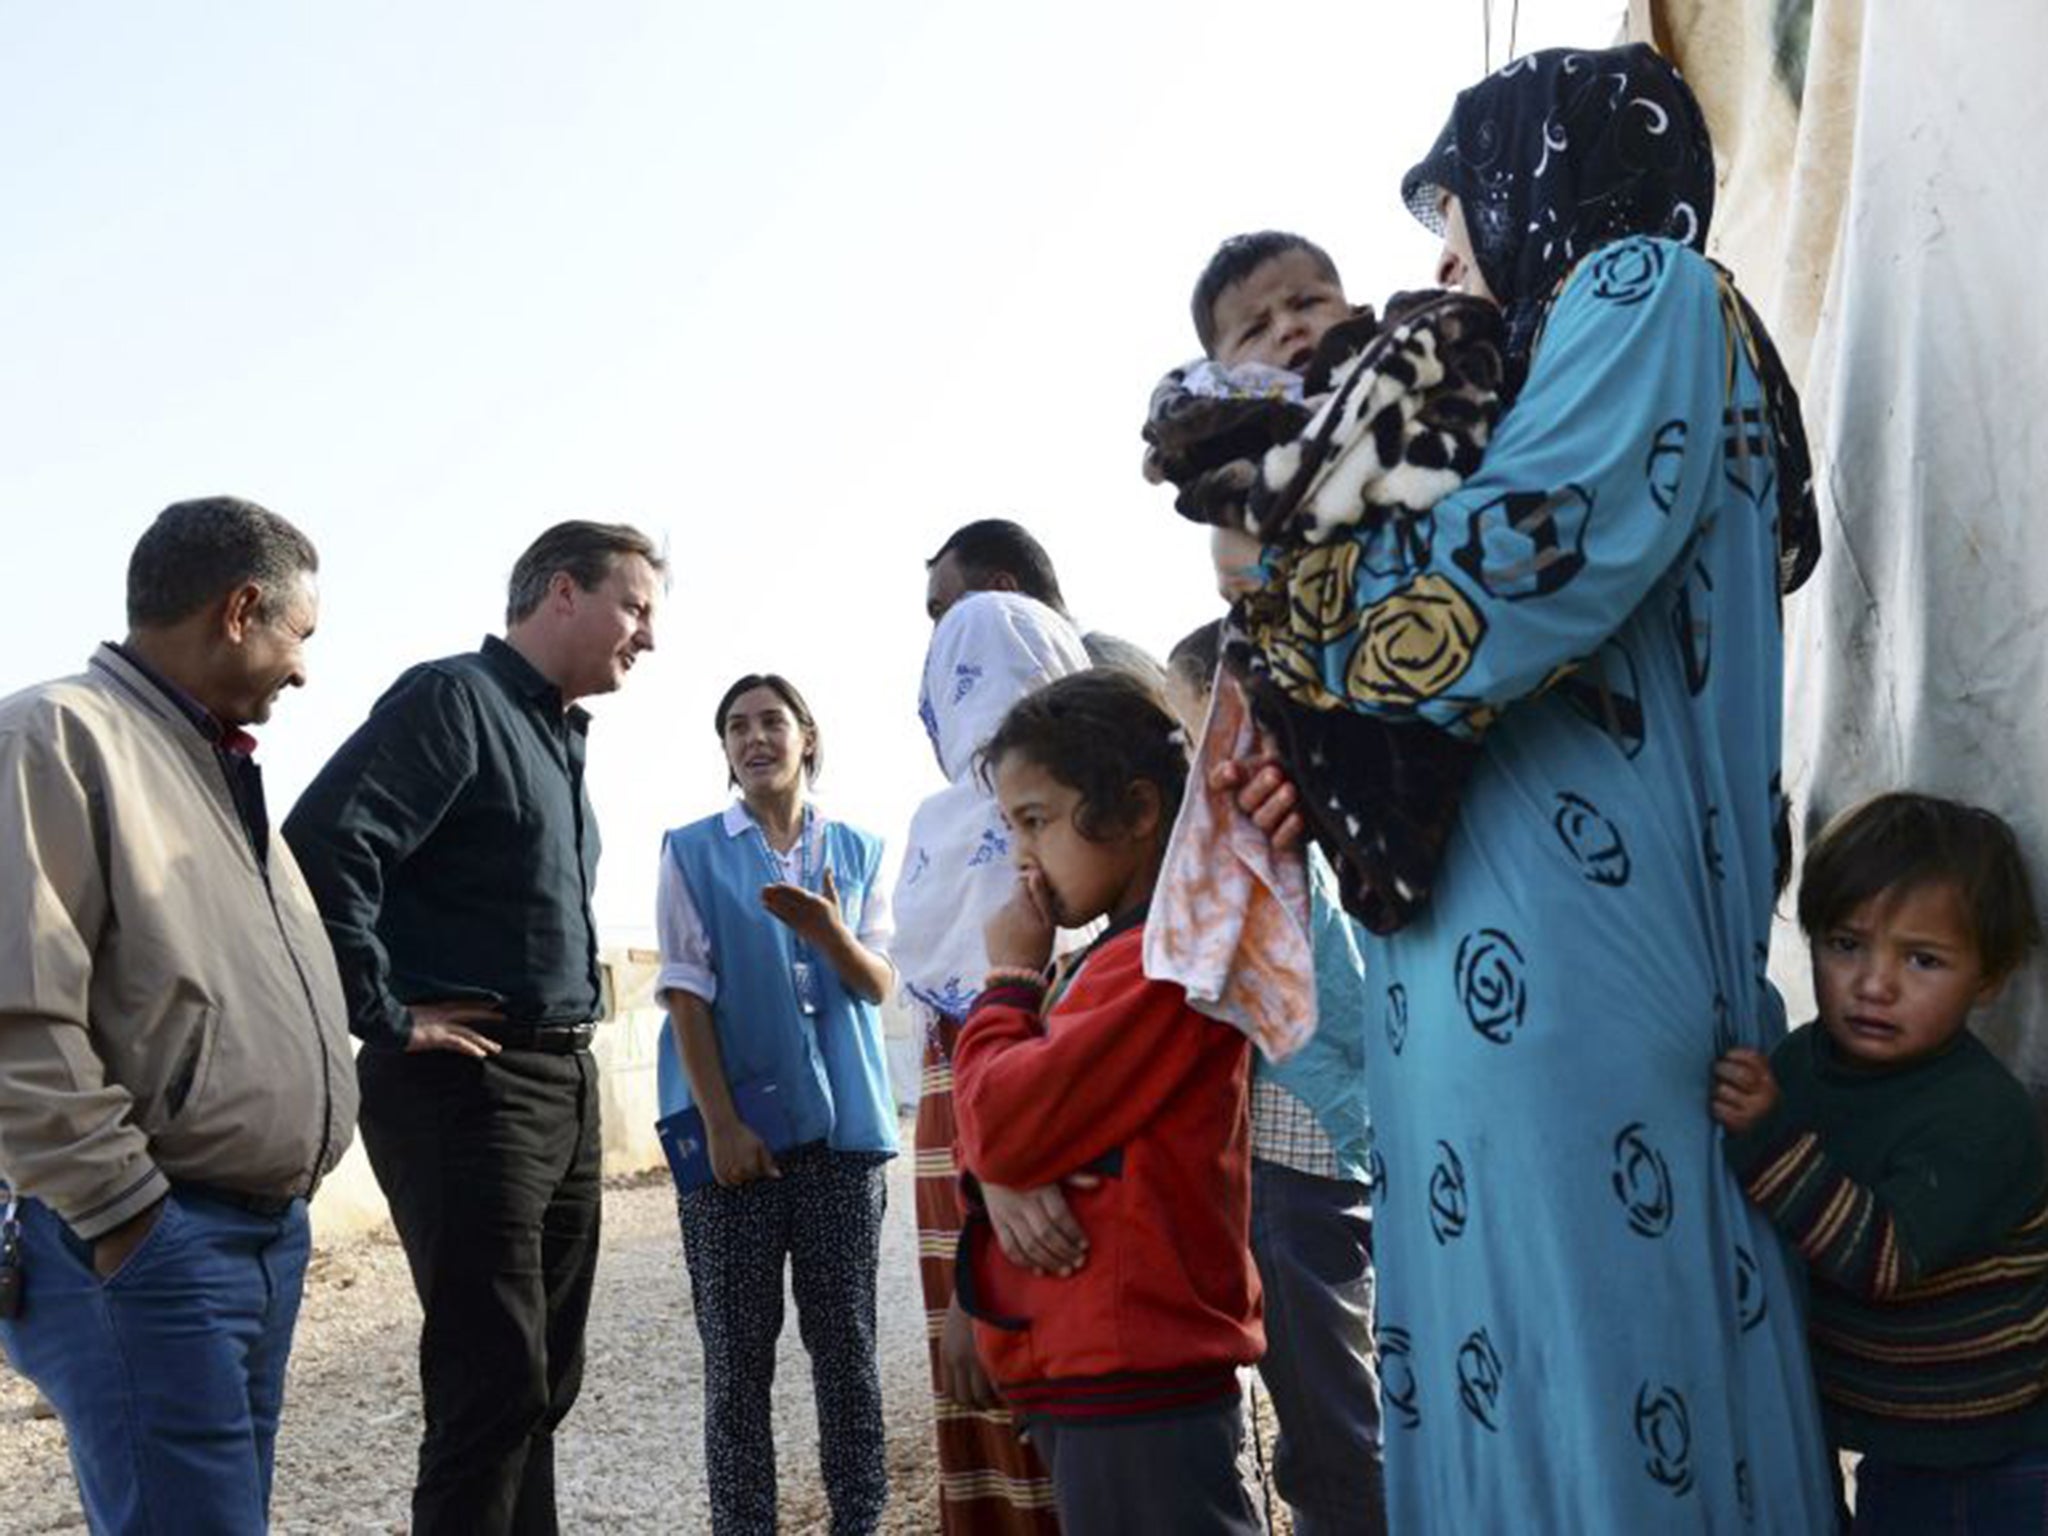 The Prime Minister meeting refugees in Jordan last month